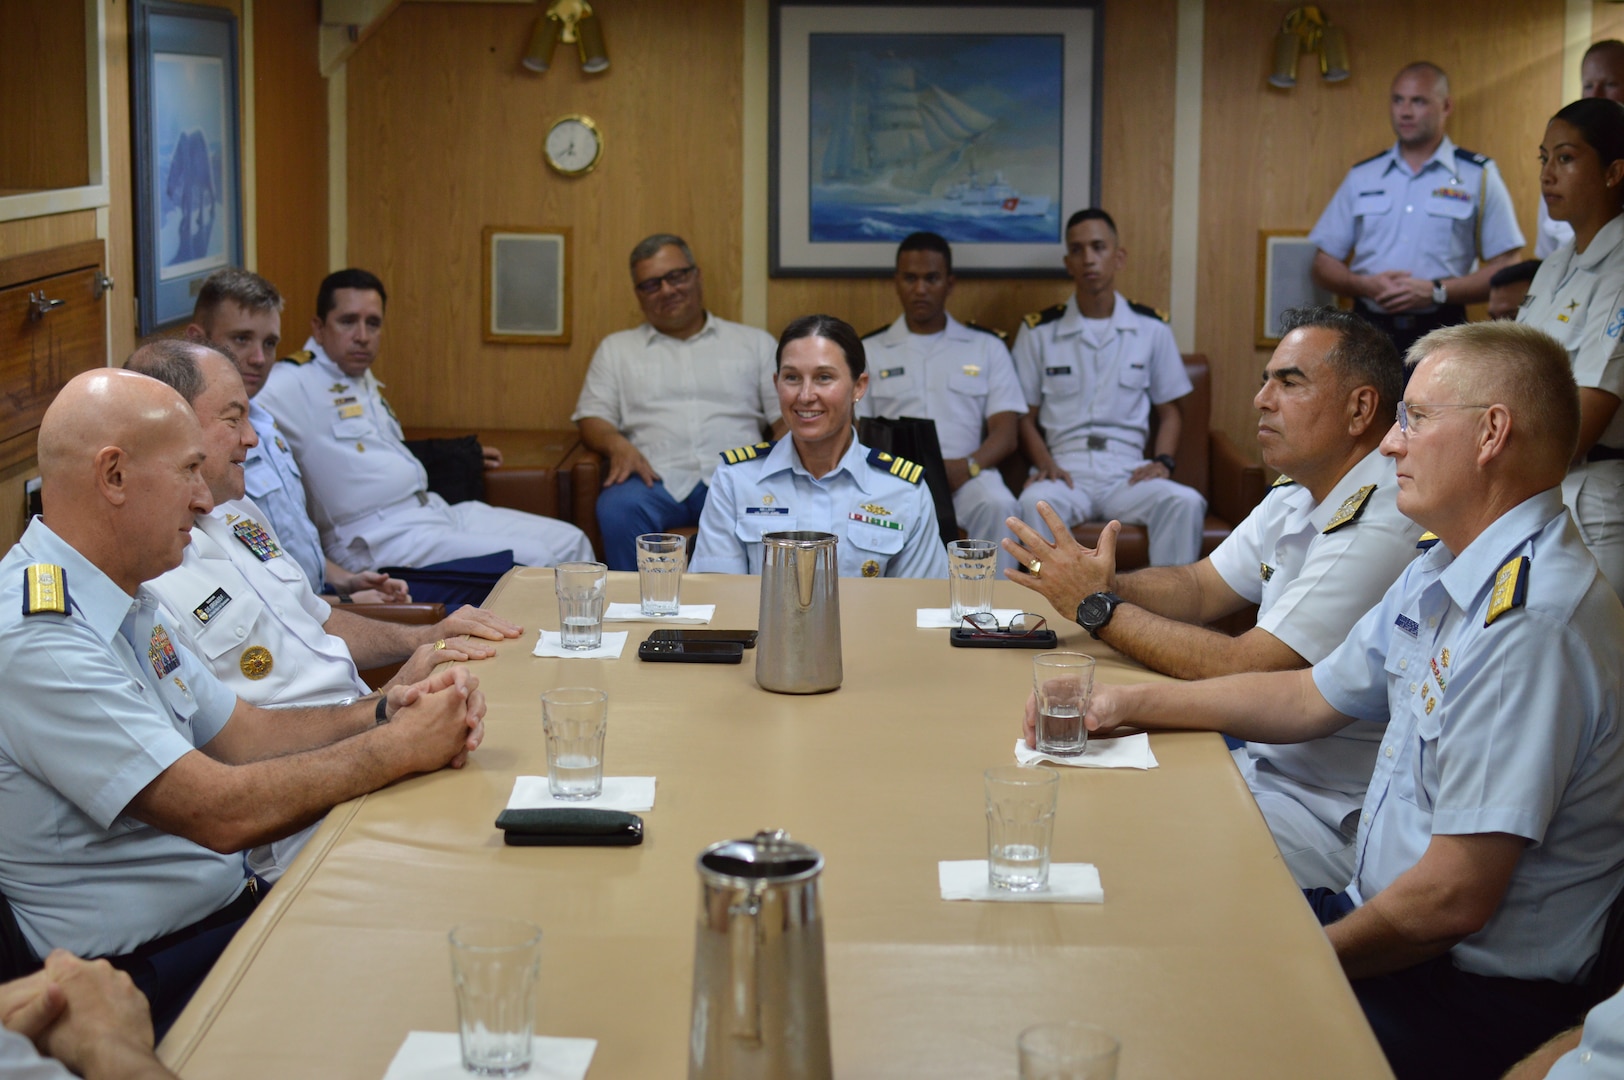 U.S. Coast Guard Cutter Bear's (WMEC 901) Commanding Officer Cmdr. Brooke Millard holds a meeting in Bear's wardroom with the Colombian Chief of Naval Operations Vice Adm. Orlando Enrique Grisales Franceschi, U.S. Coast Guard Director of Joint Interagency Task Force South Rear Adm. Mark Fedor, U.S. Coast Guard Seventh District Commander Rear Adm. Douglas Schofield, and the Columbian Commander of the Caribbean Naval Force Vice Admiral Hernando Enrique Mattos Dager. Bear's crew cross-trained with the Colombian Navy, sharing maritime safety and security tactics. (U.S. Coast Guard photo by Ensign Melody Silva)